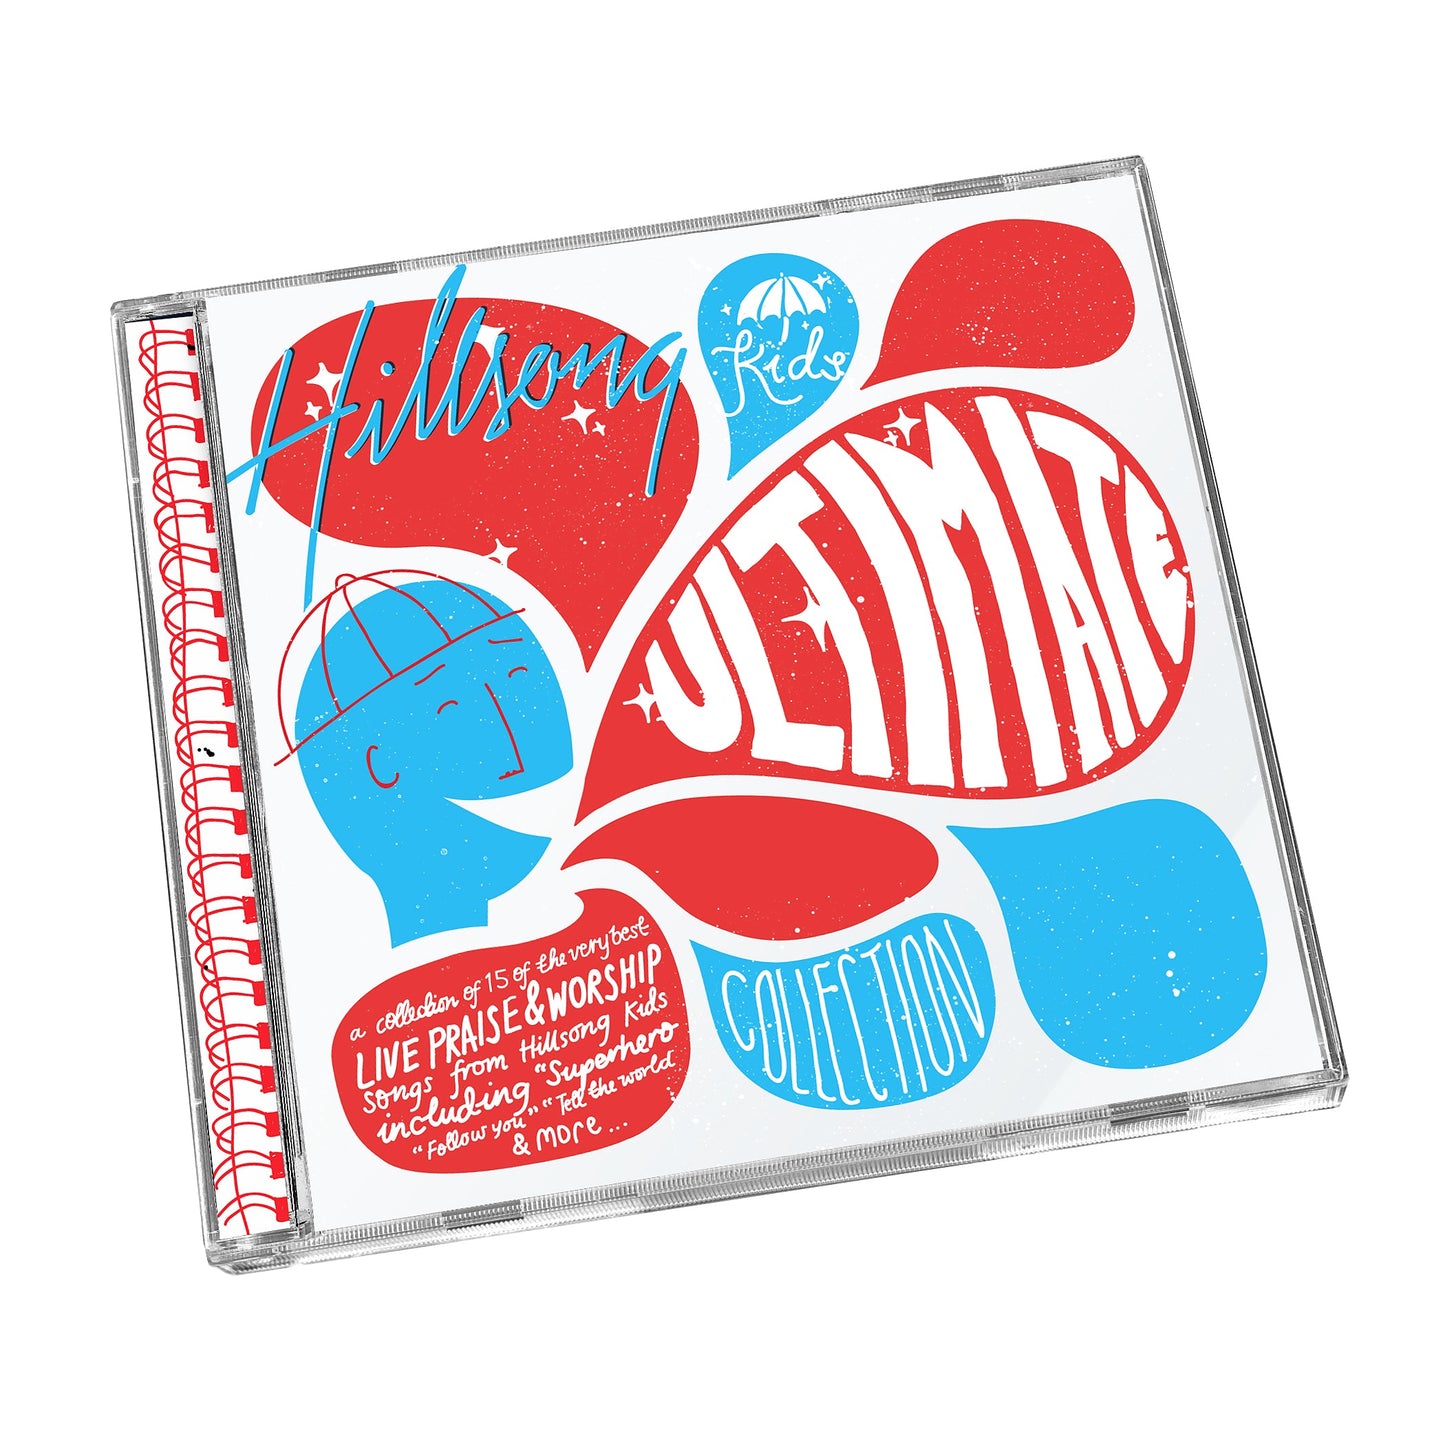 Hillsong Kids Ultimate Collection CD